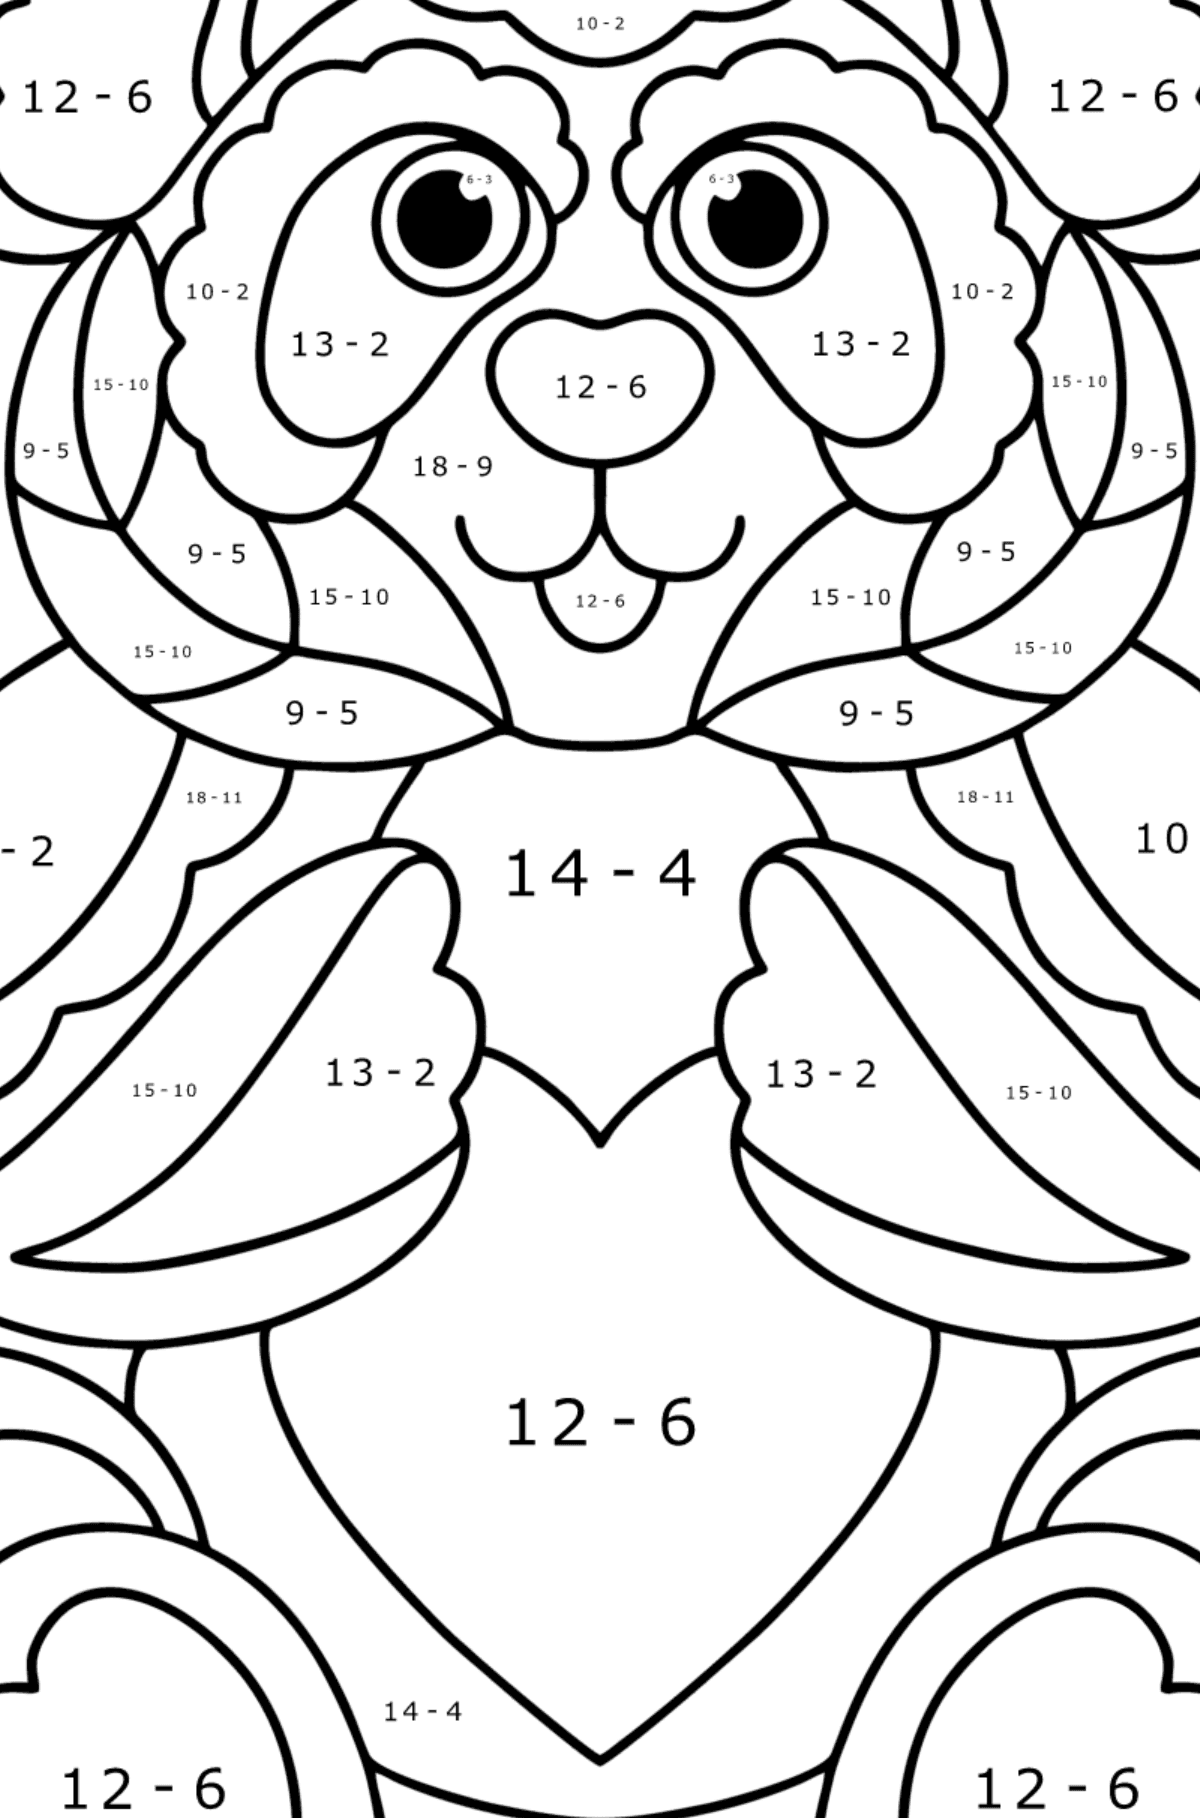 Panda antistress coloring page - Math Coloring - Subtraction for Kids